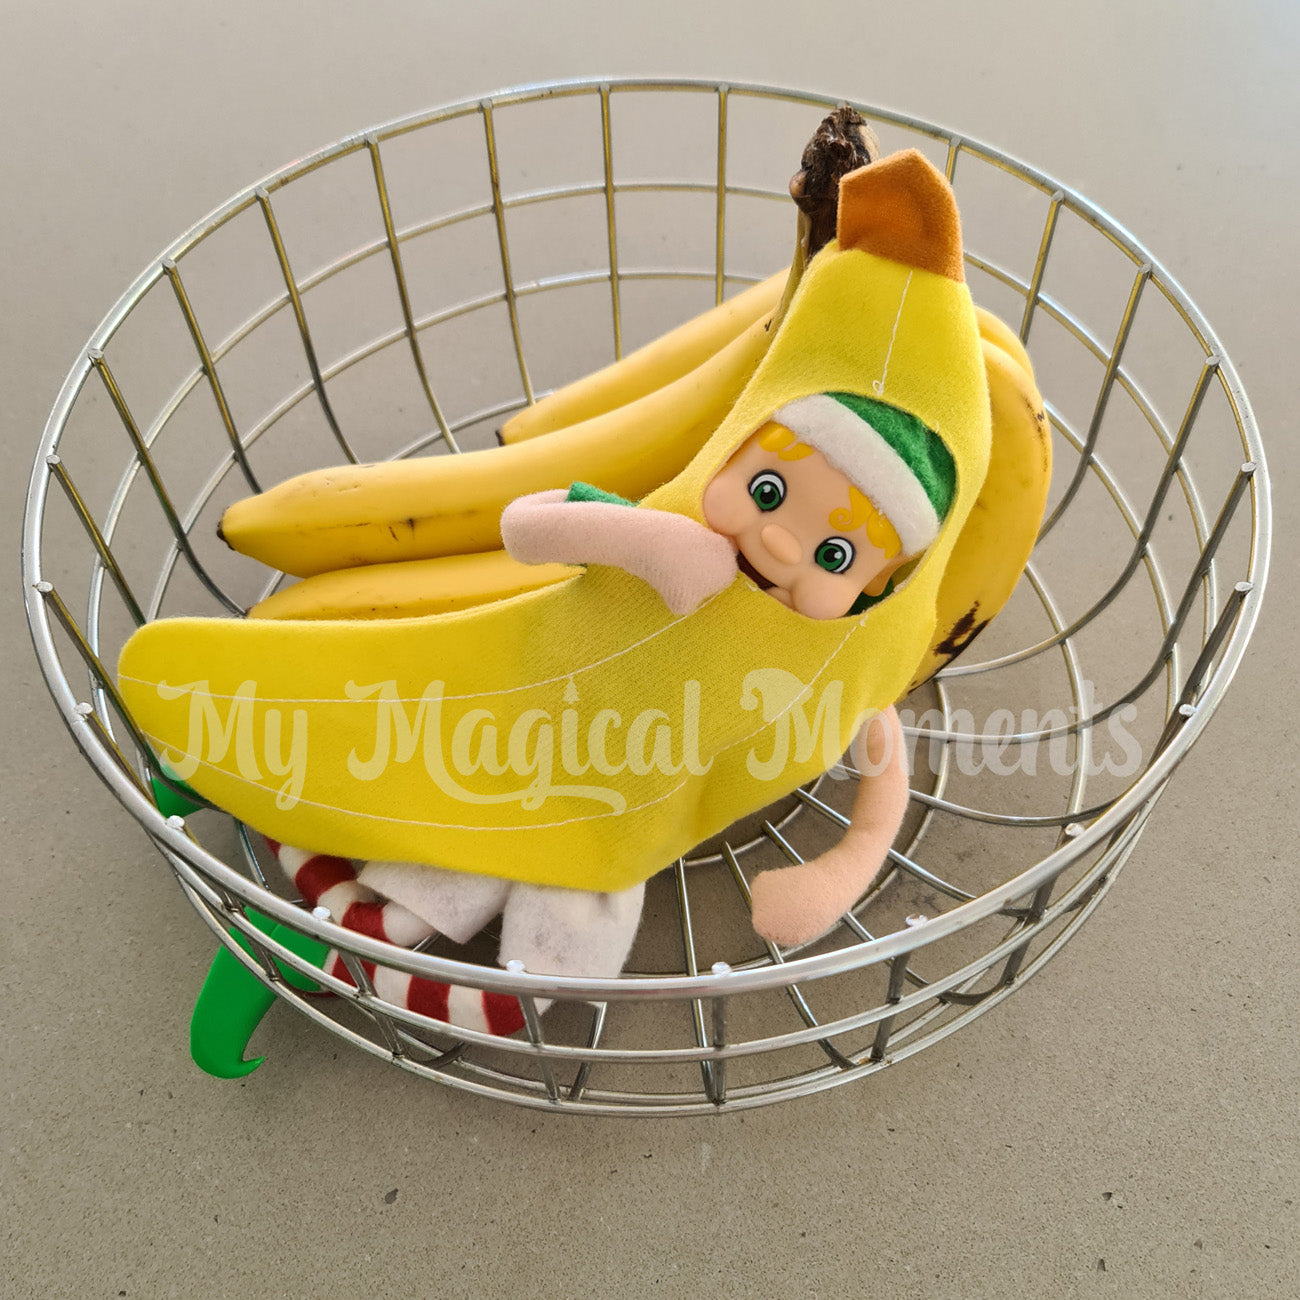 Elf friends dressed as a banana hiding in a fruit bowl